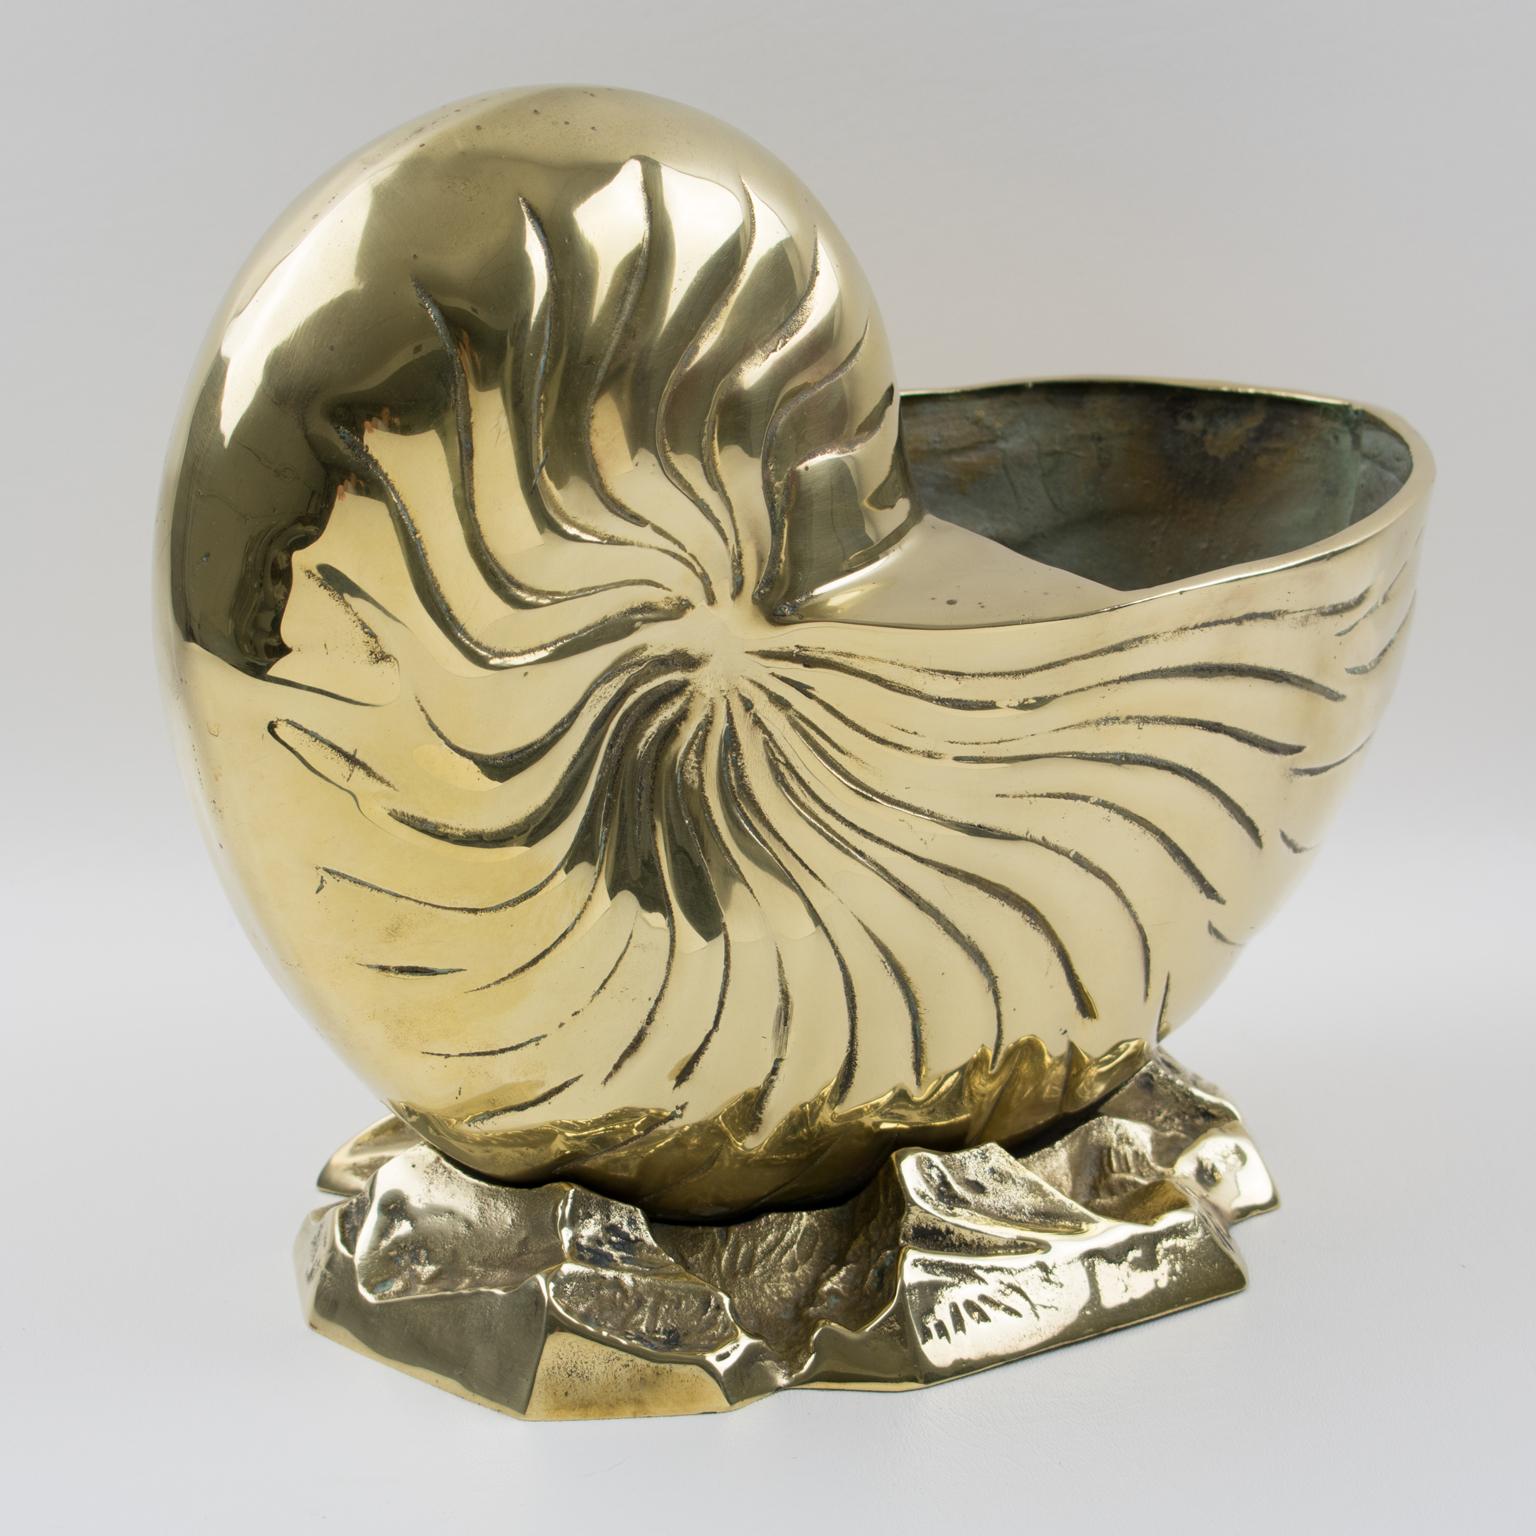 Brass Sea Shell Planter - 4 For Sale on 1stDibs